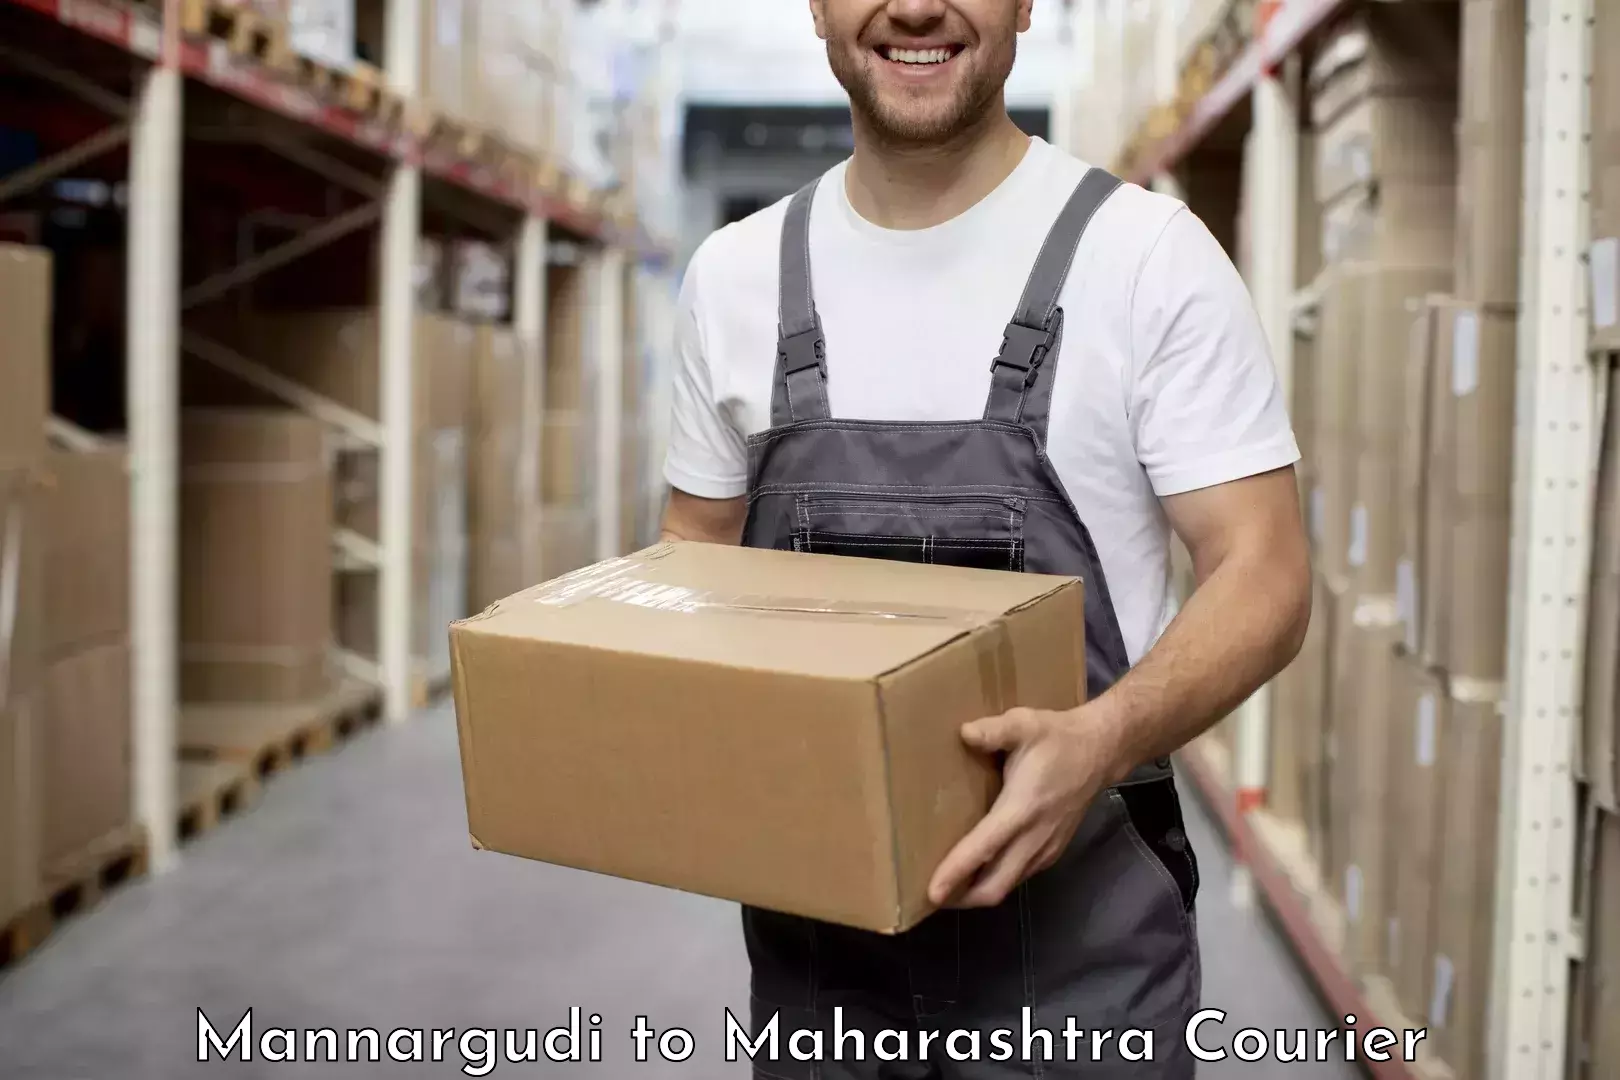 State-of-the-art courier technology Mannargudi to Tuljapur